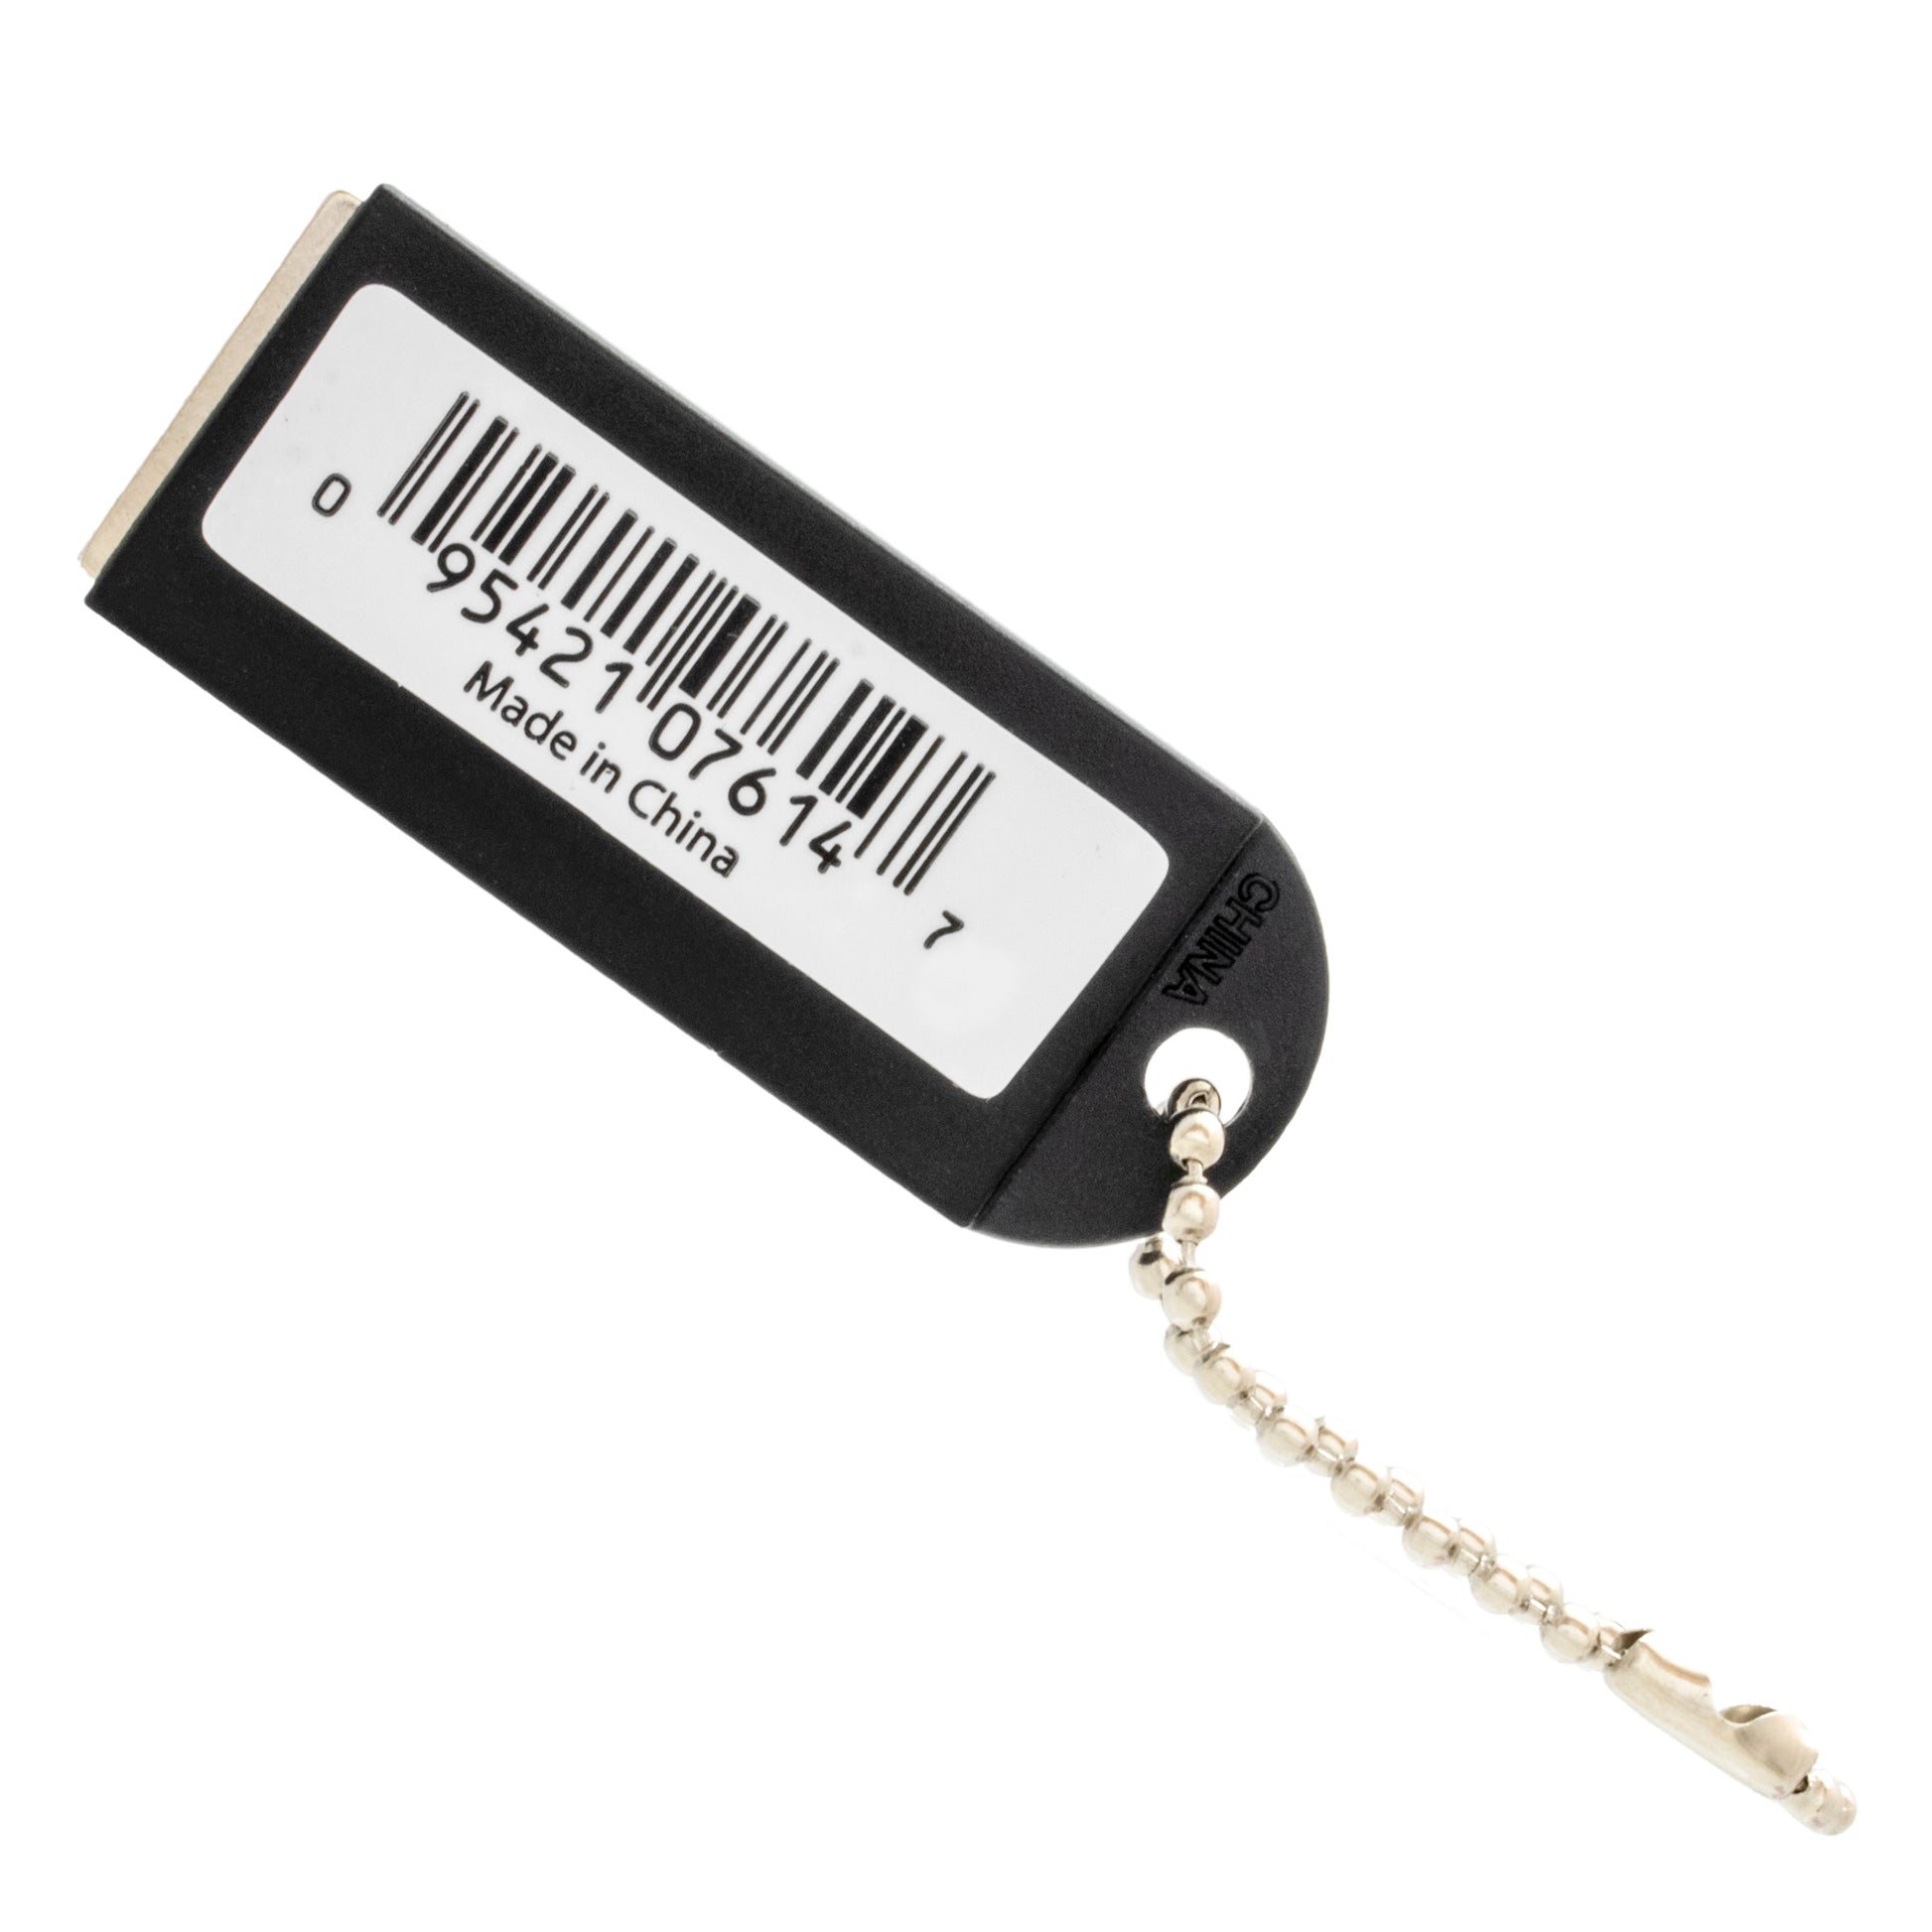 Load image into Gallery viewer, KCMBK-BULK Neodymium Key Chain Magnet with Logo, Black - Front View